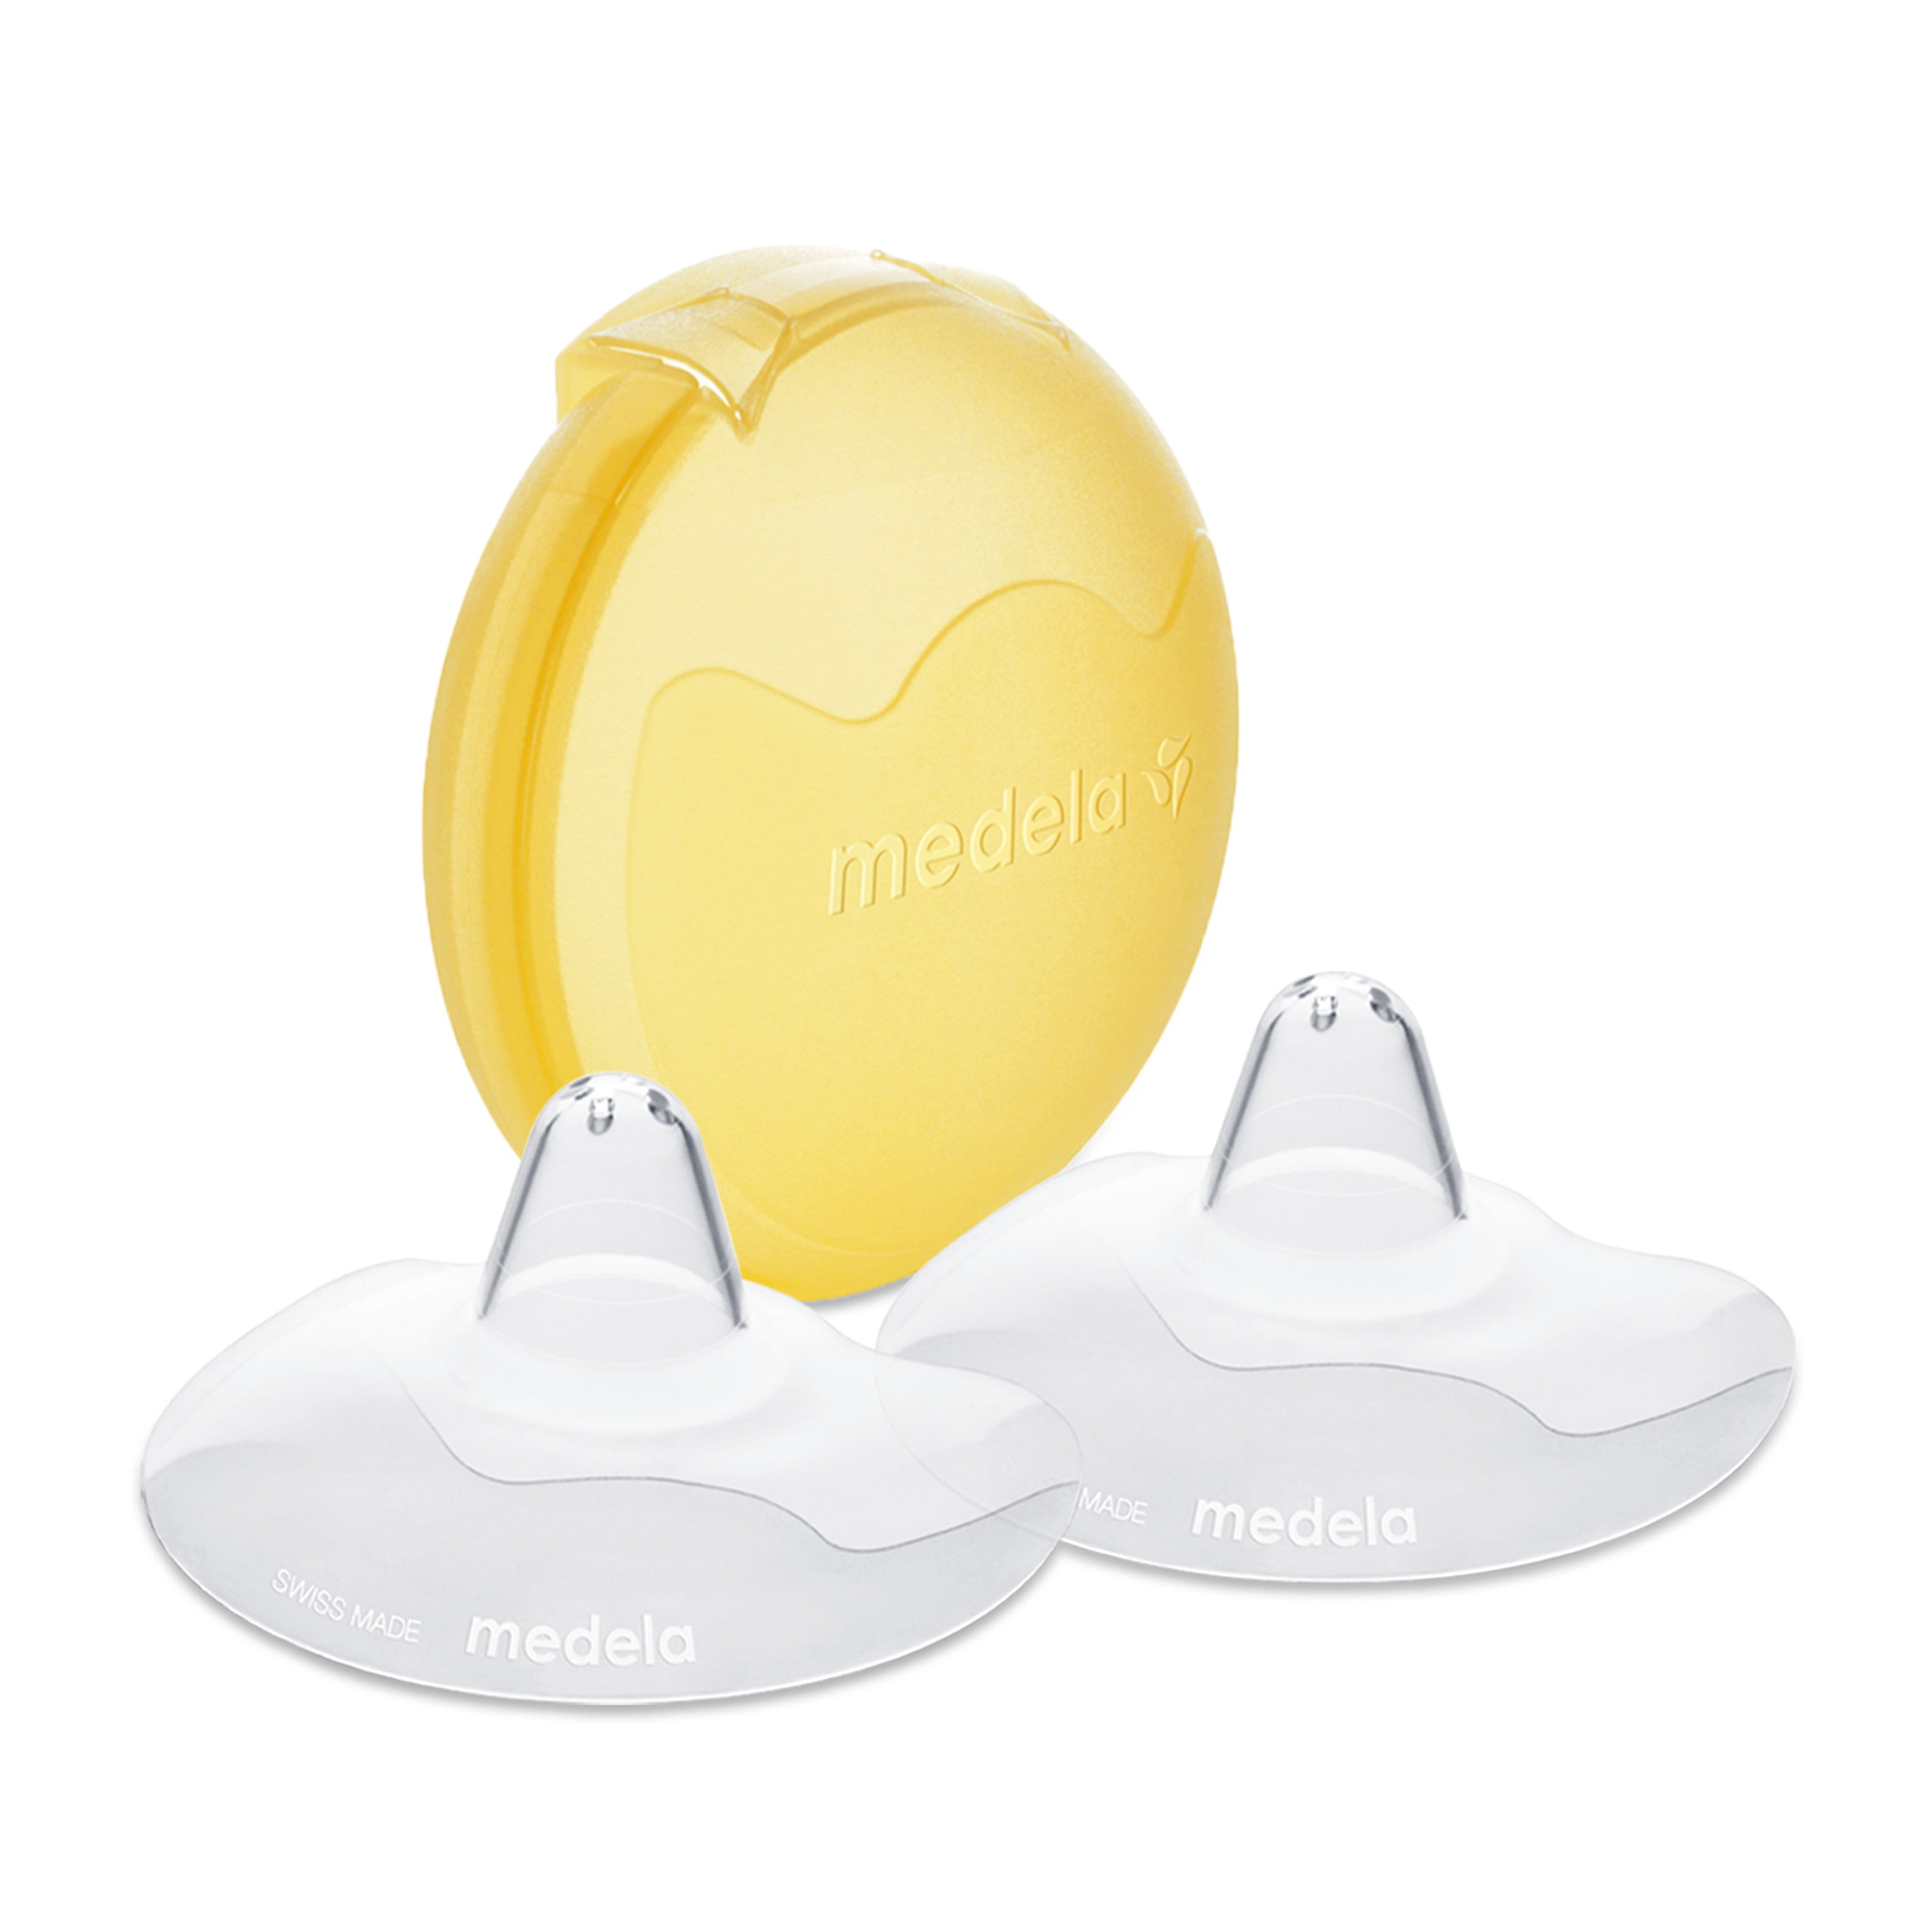 Medela Contact Nipple Shields 24mm with case